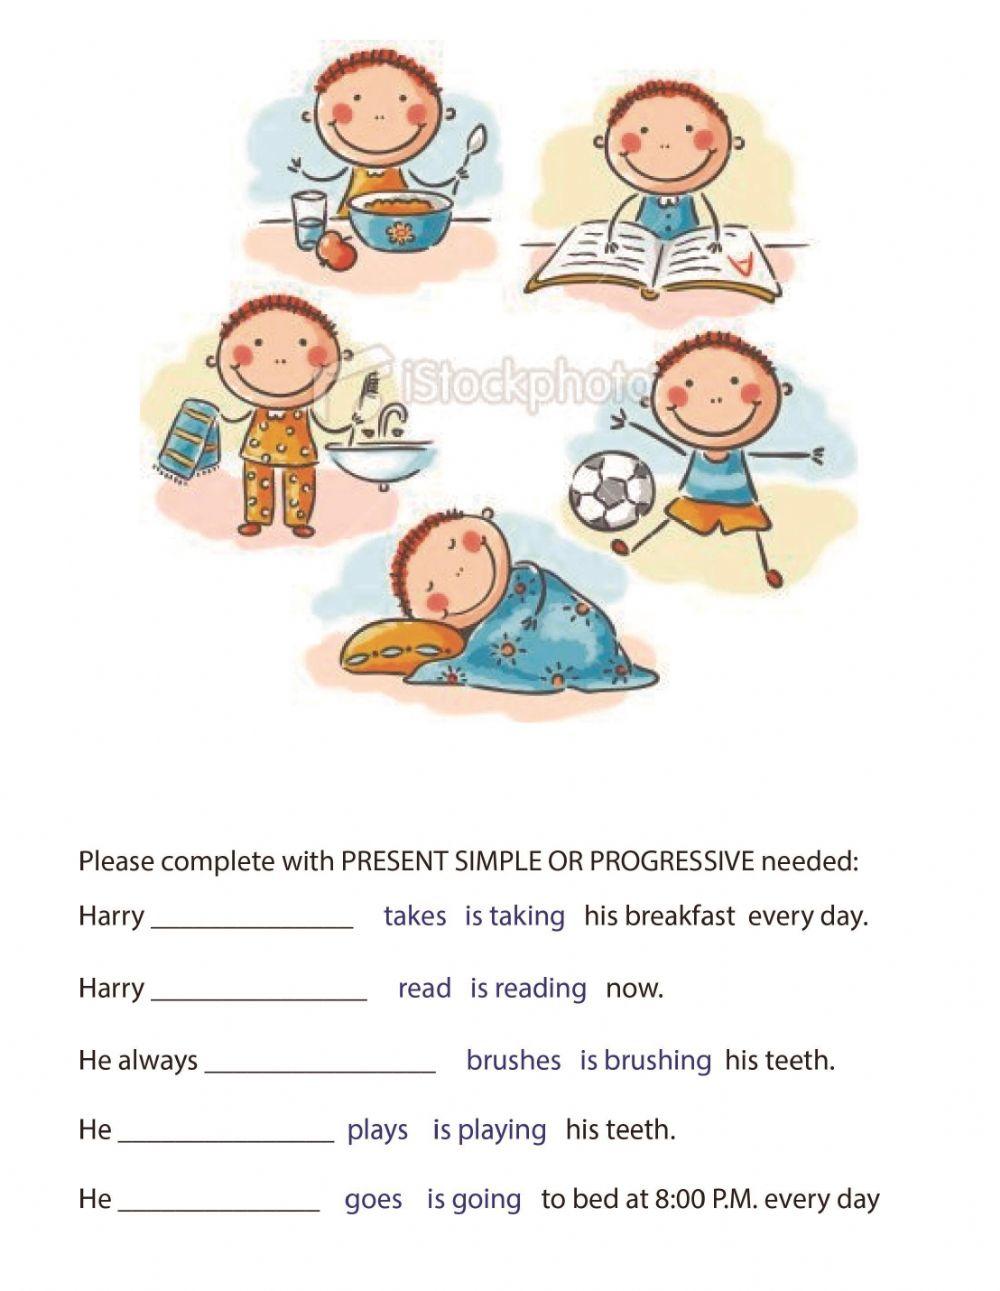 Adverbs of frequency, Comparatives, Superlatives, Present Simple and Continuous Like and Don't Like